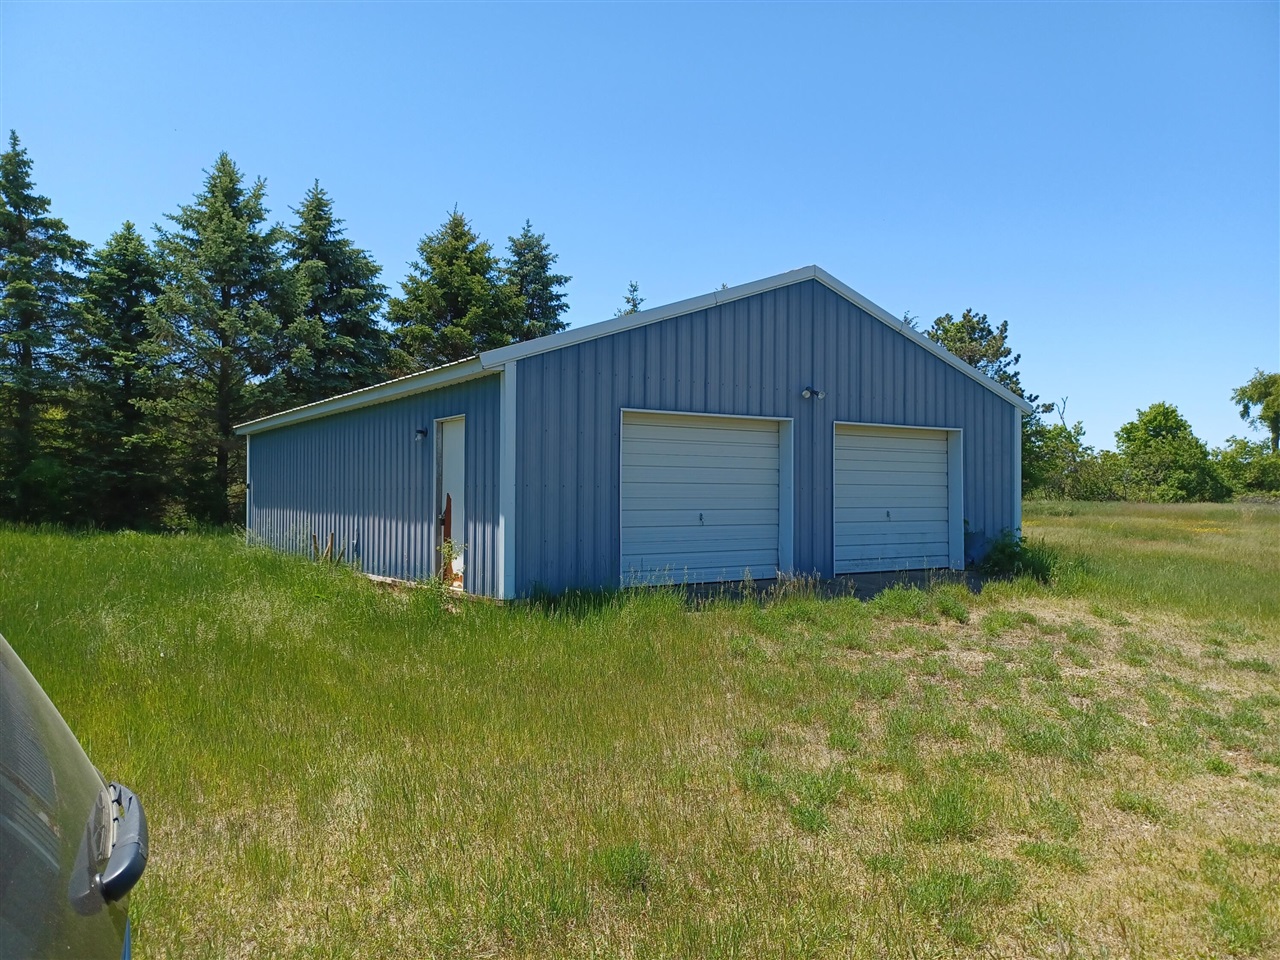 3.24 acres with a 30 x 40 pole barn with concrete floor and electric. Mobile home with 2 Bedrooms & 1 bath that needs some TLC with a well, septic and electric attached.Buyers responsibility to verify working order of well, septic & electric.